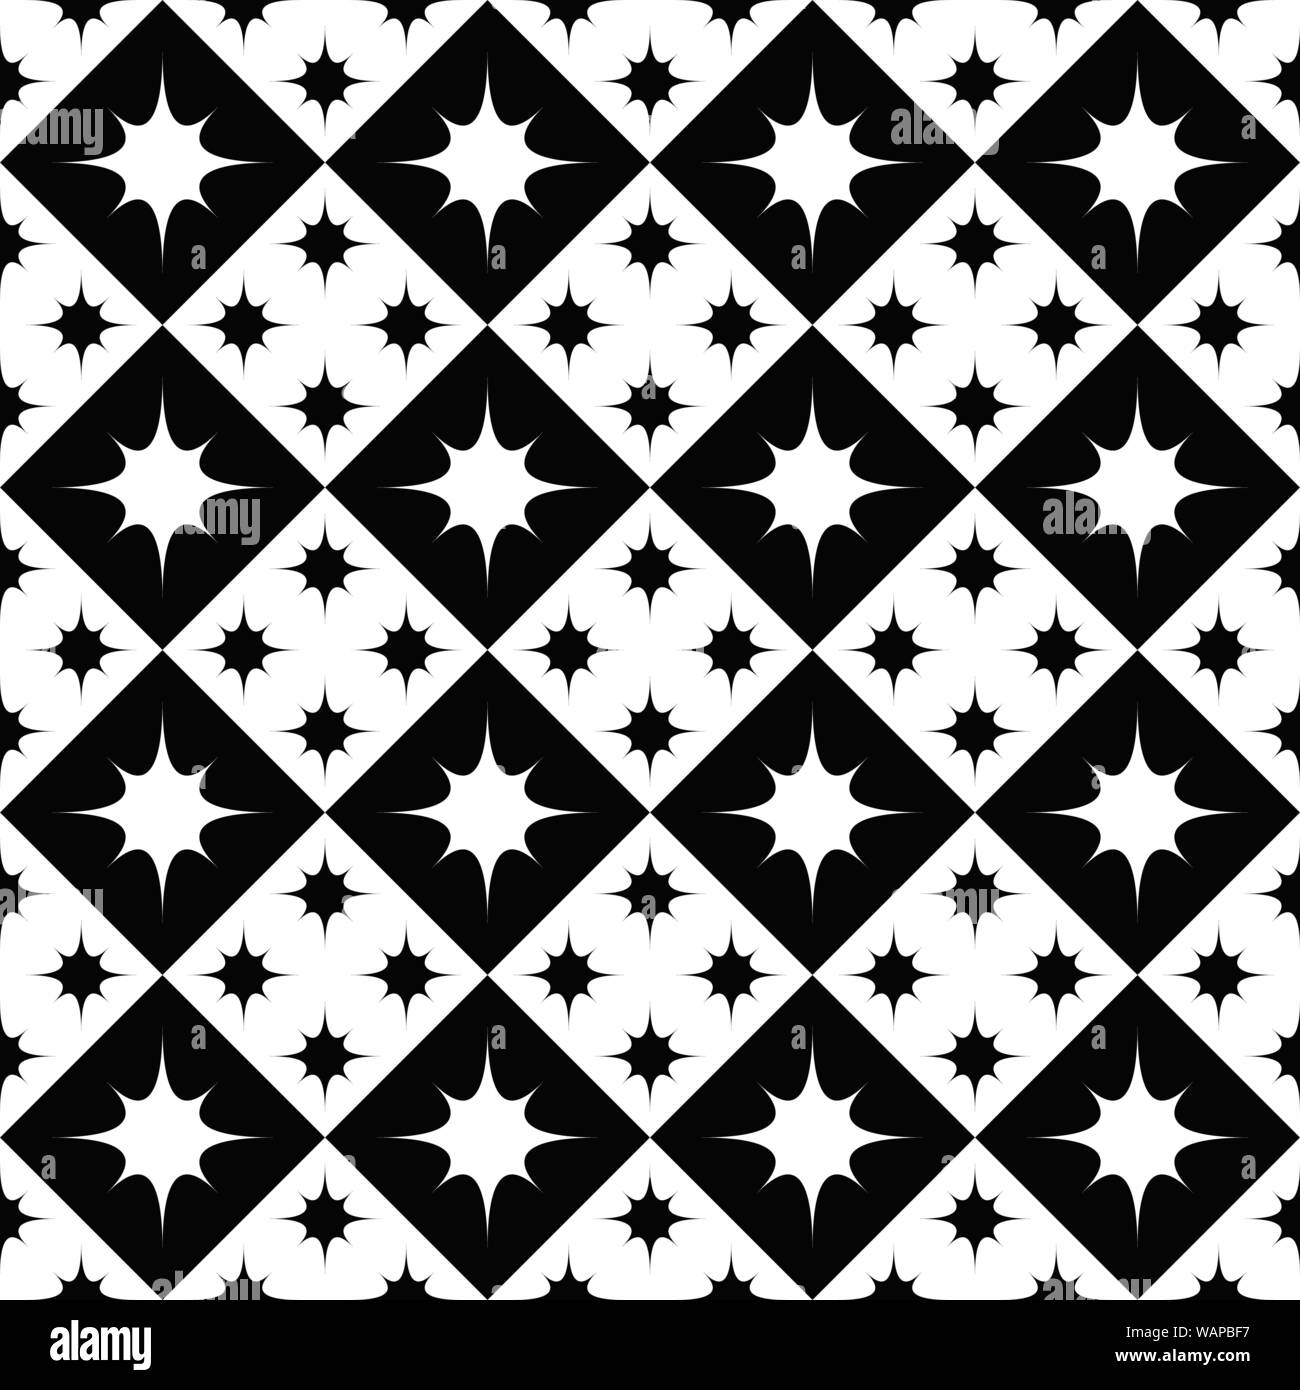 Black And White Geometrical Star Pattern Background Design Monochrome Vector Illustration From 1219